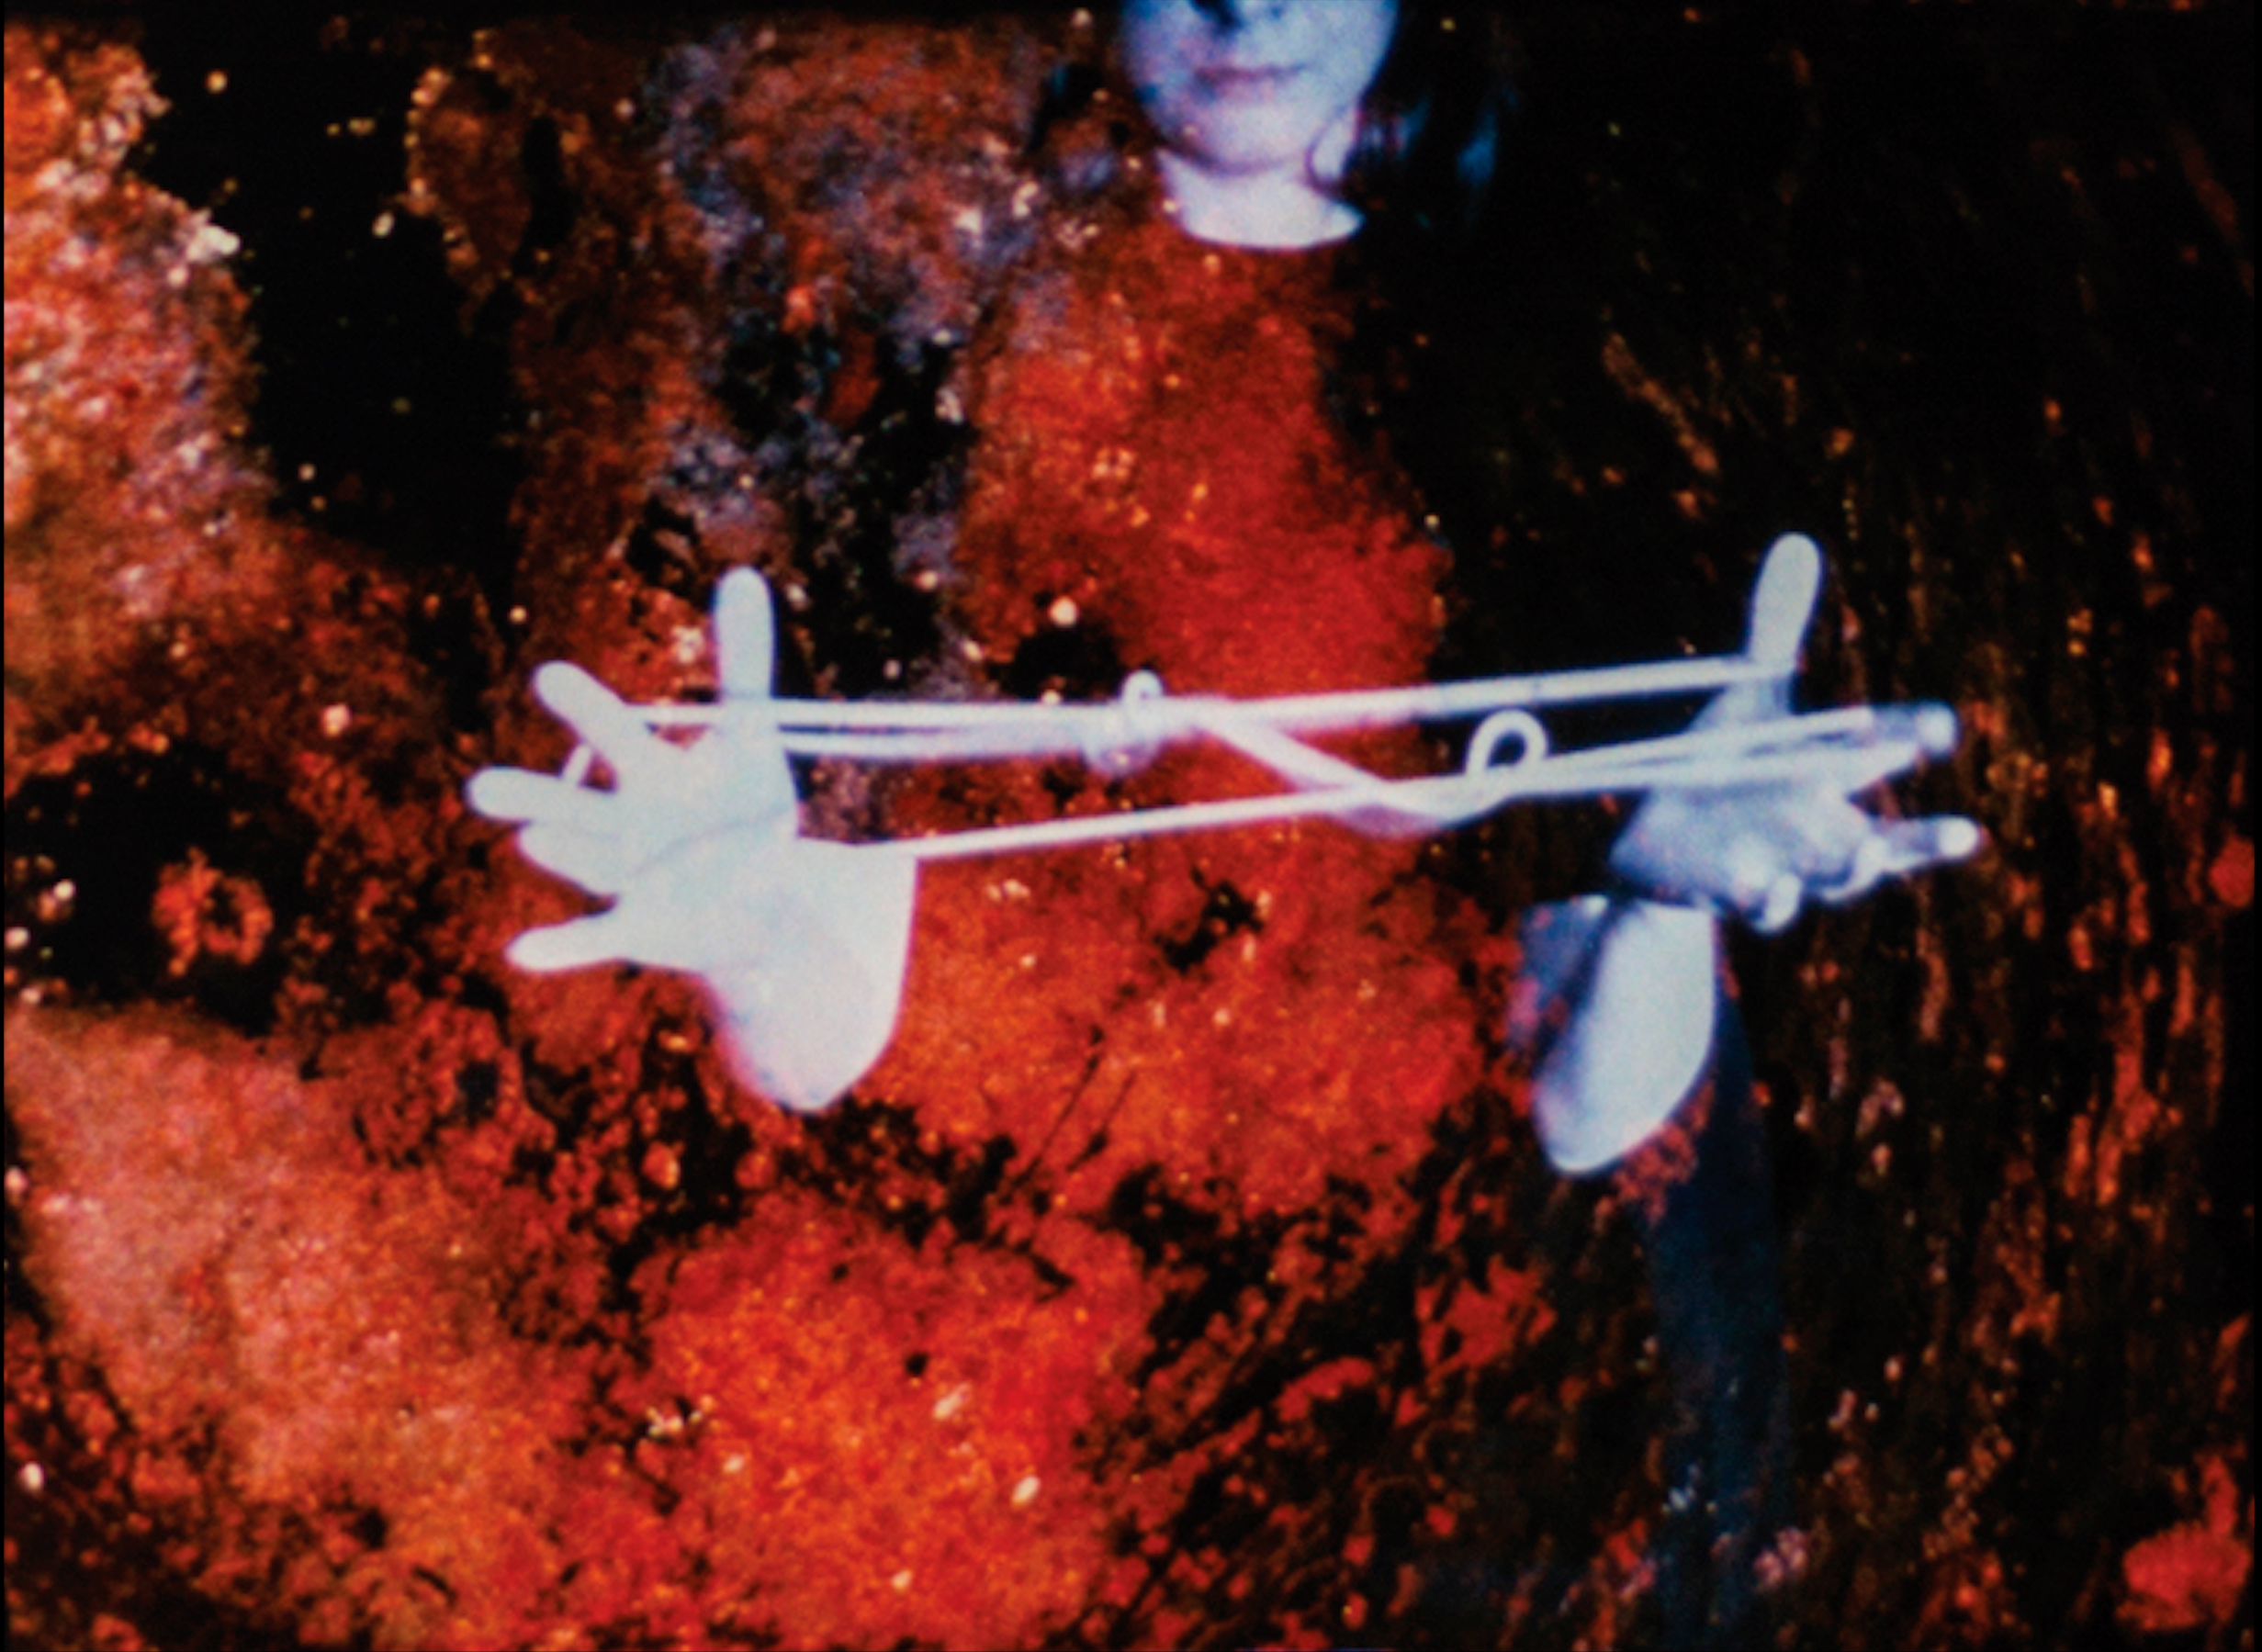 Filmstill from 16 mm filming by Harry Smith, Harry Smith Archives, New York, 1970–1980.